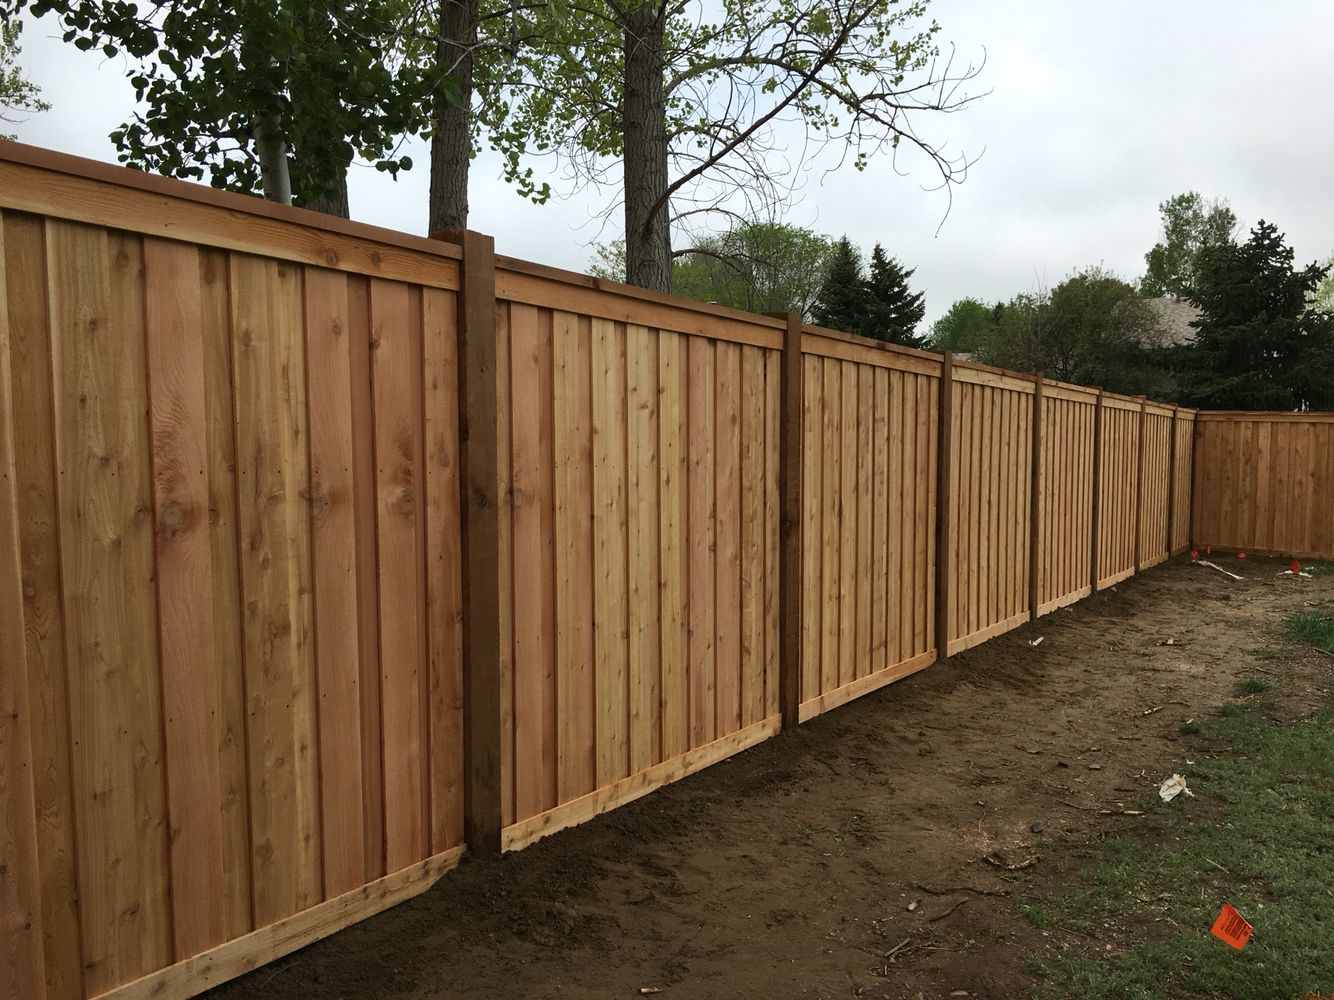 7 Tall Cedar Privacy Fence With 6x6 Posts 2x6 Top Cap 6 intended for size 1334 X 1000